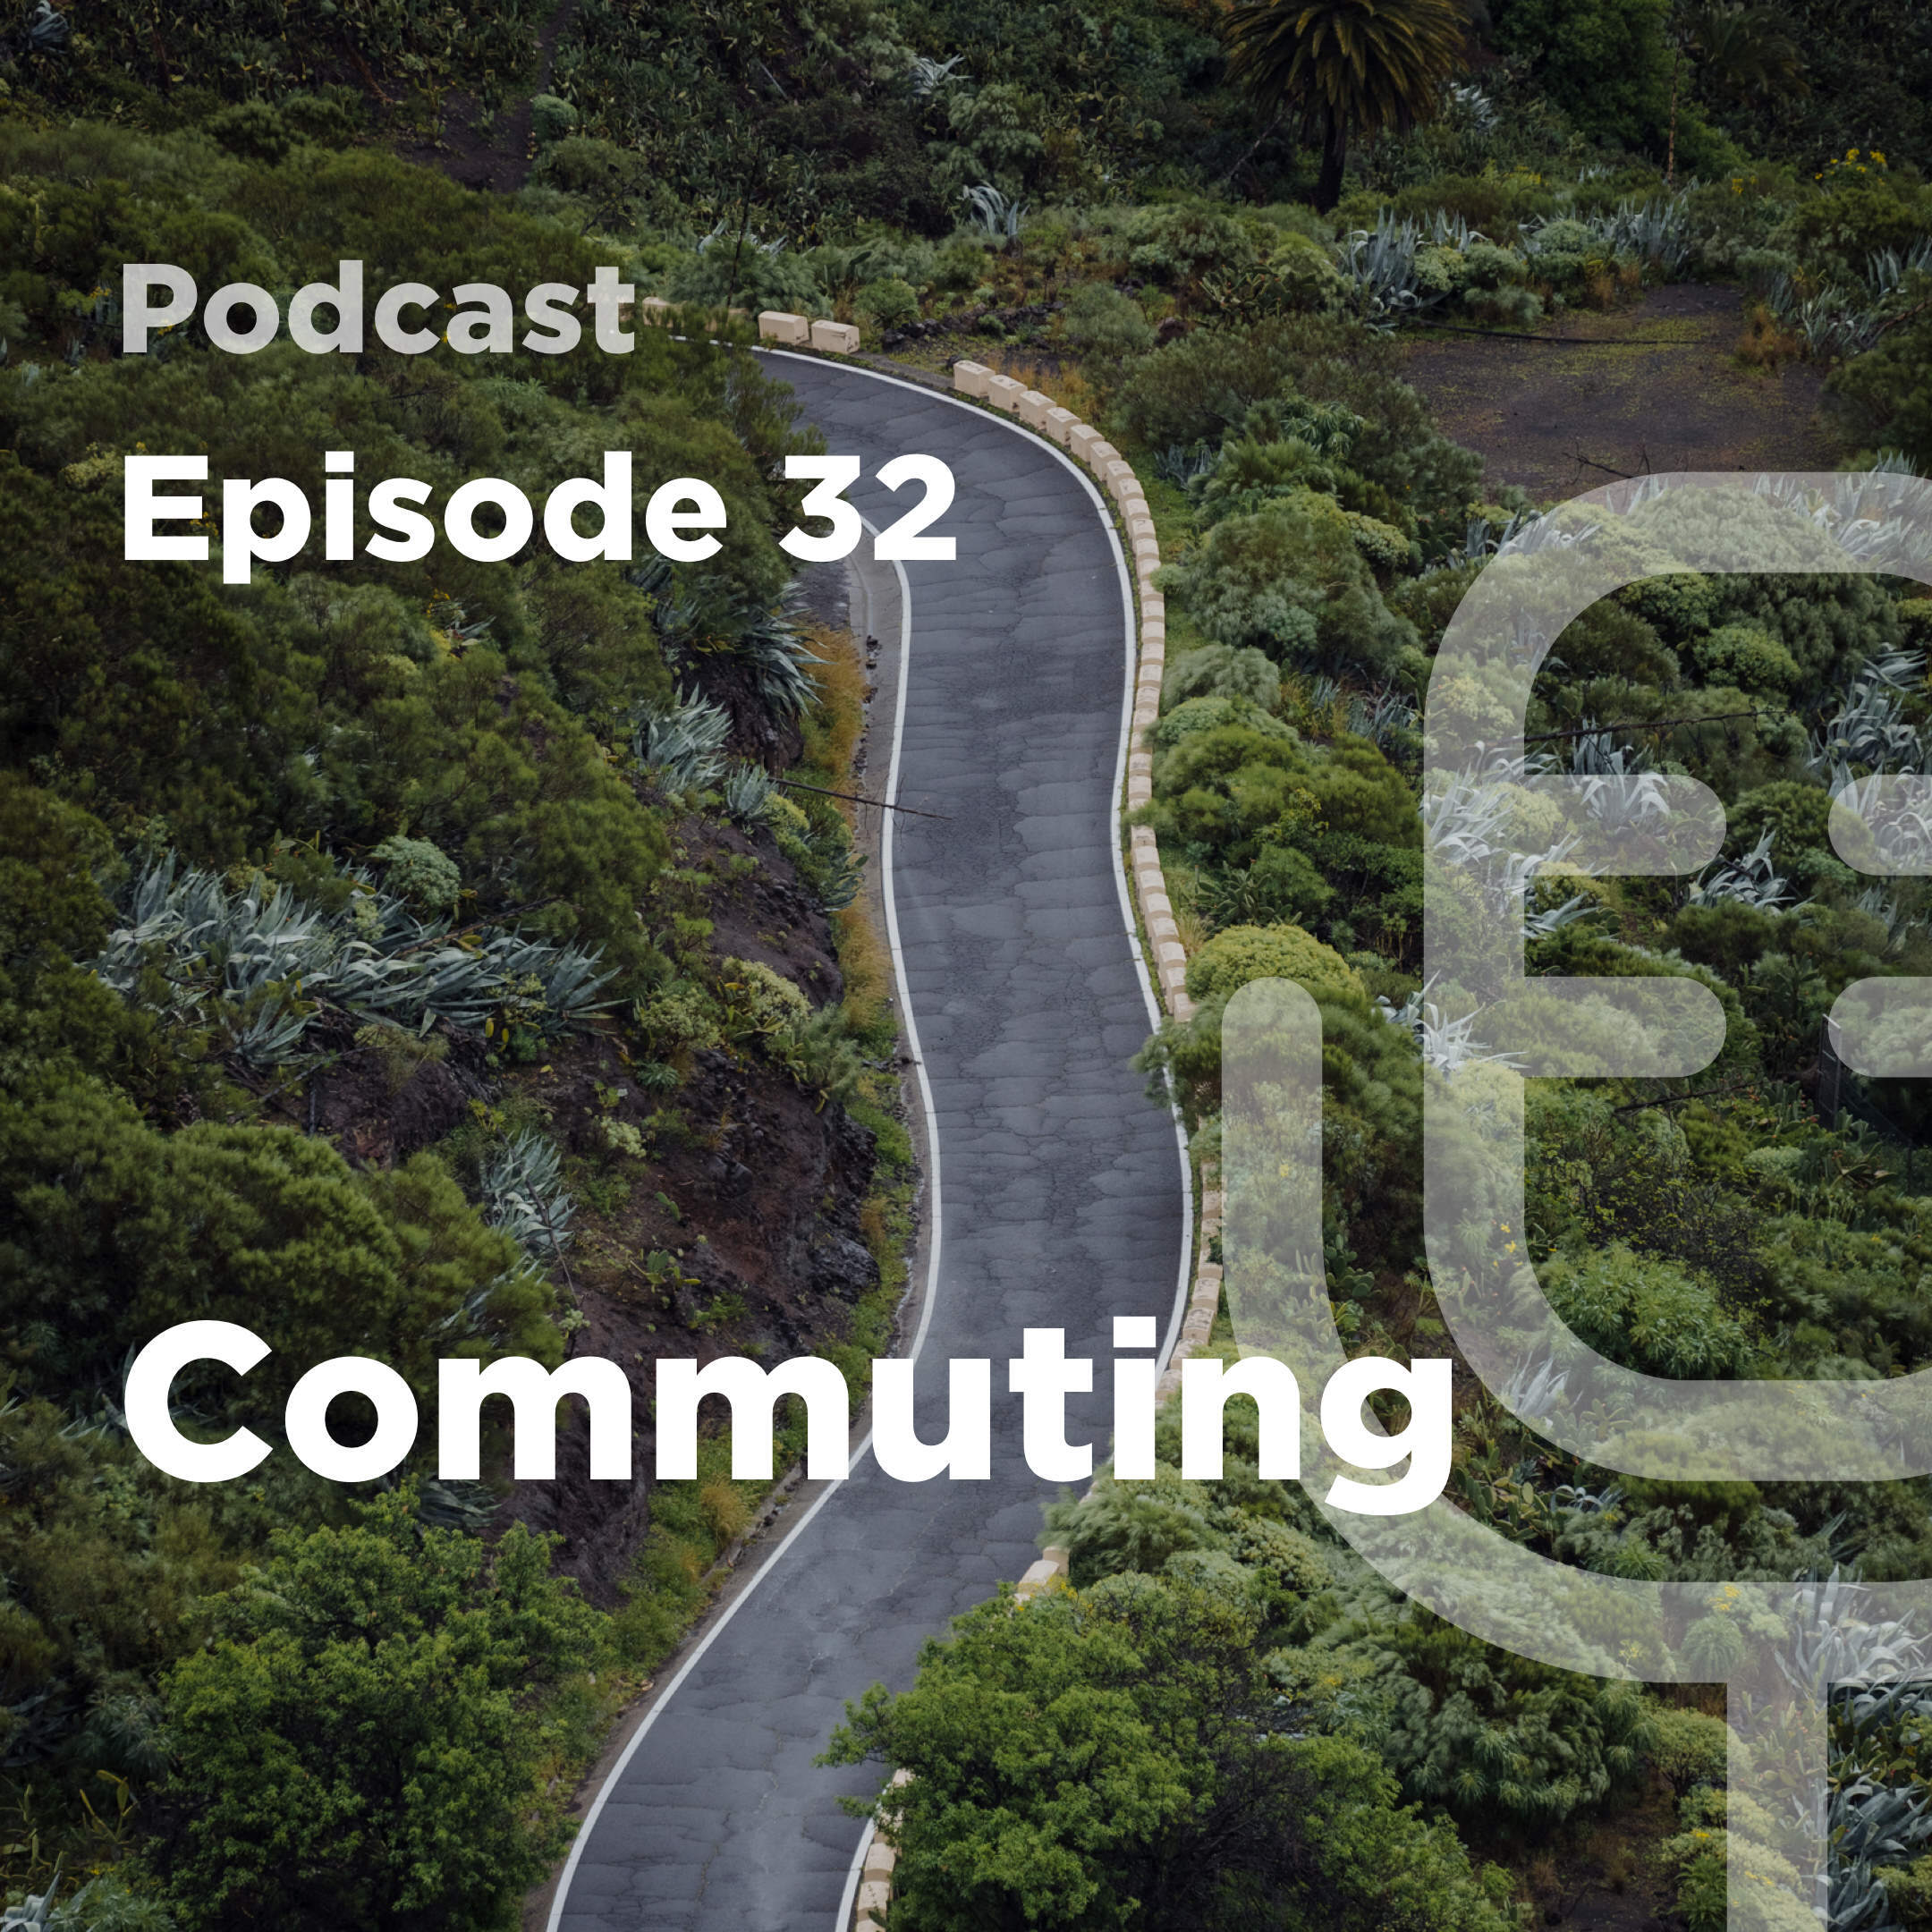 Beter Worden Podcast - Commuting - JOIN Cycling